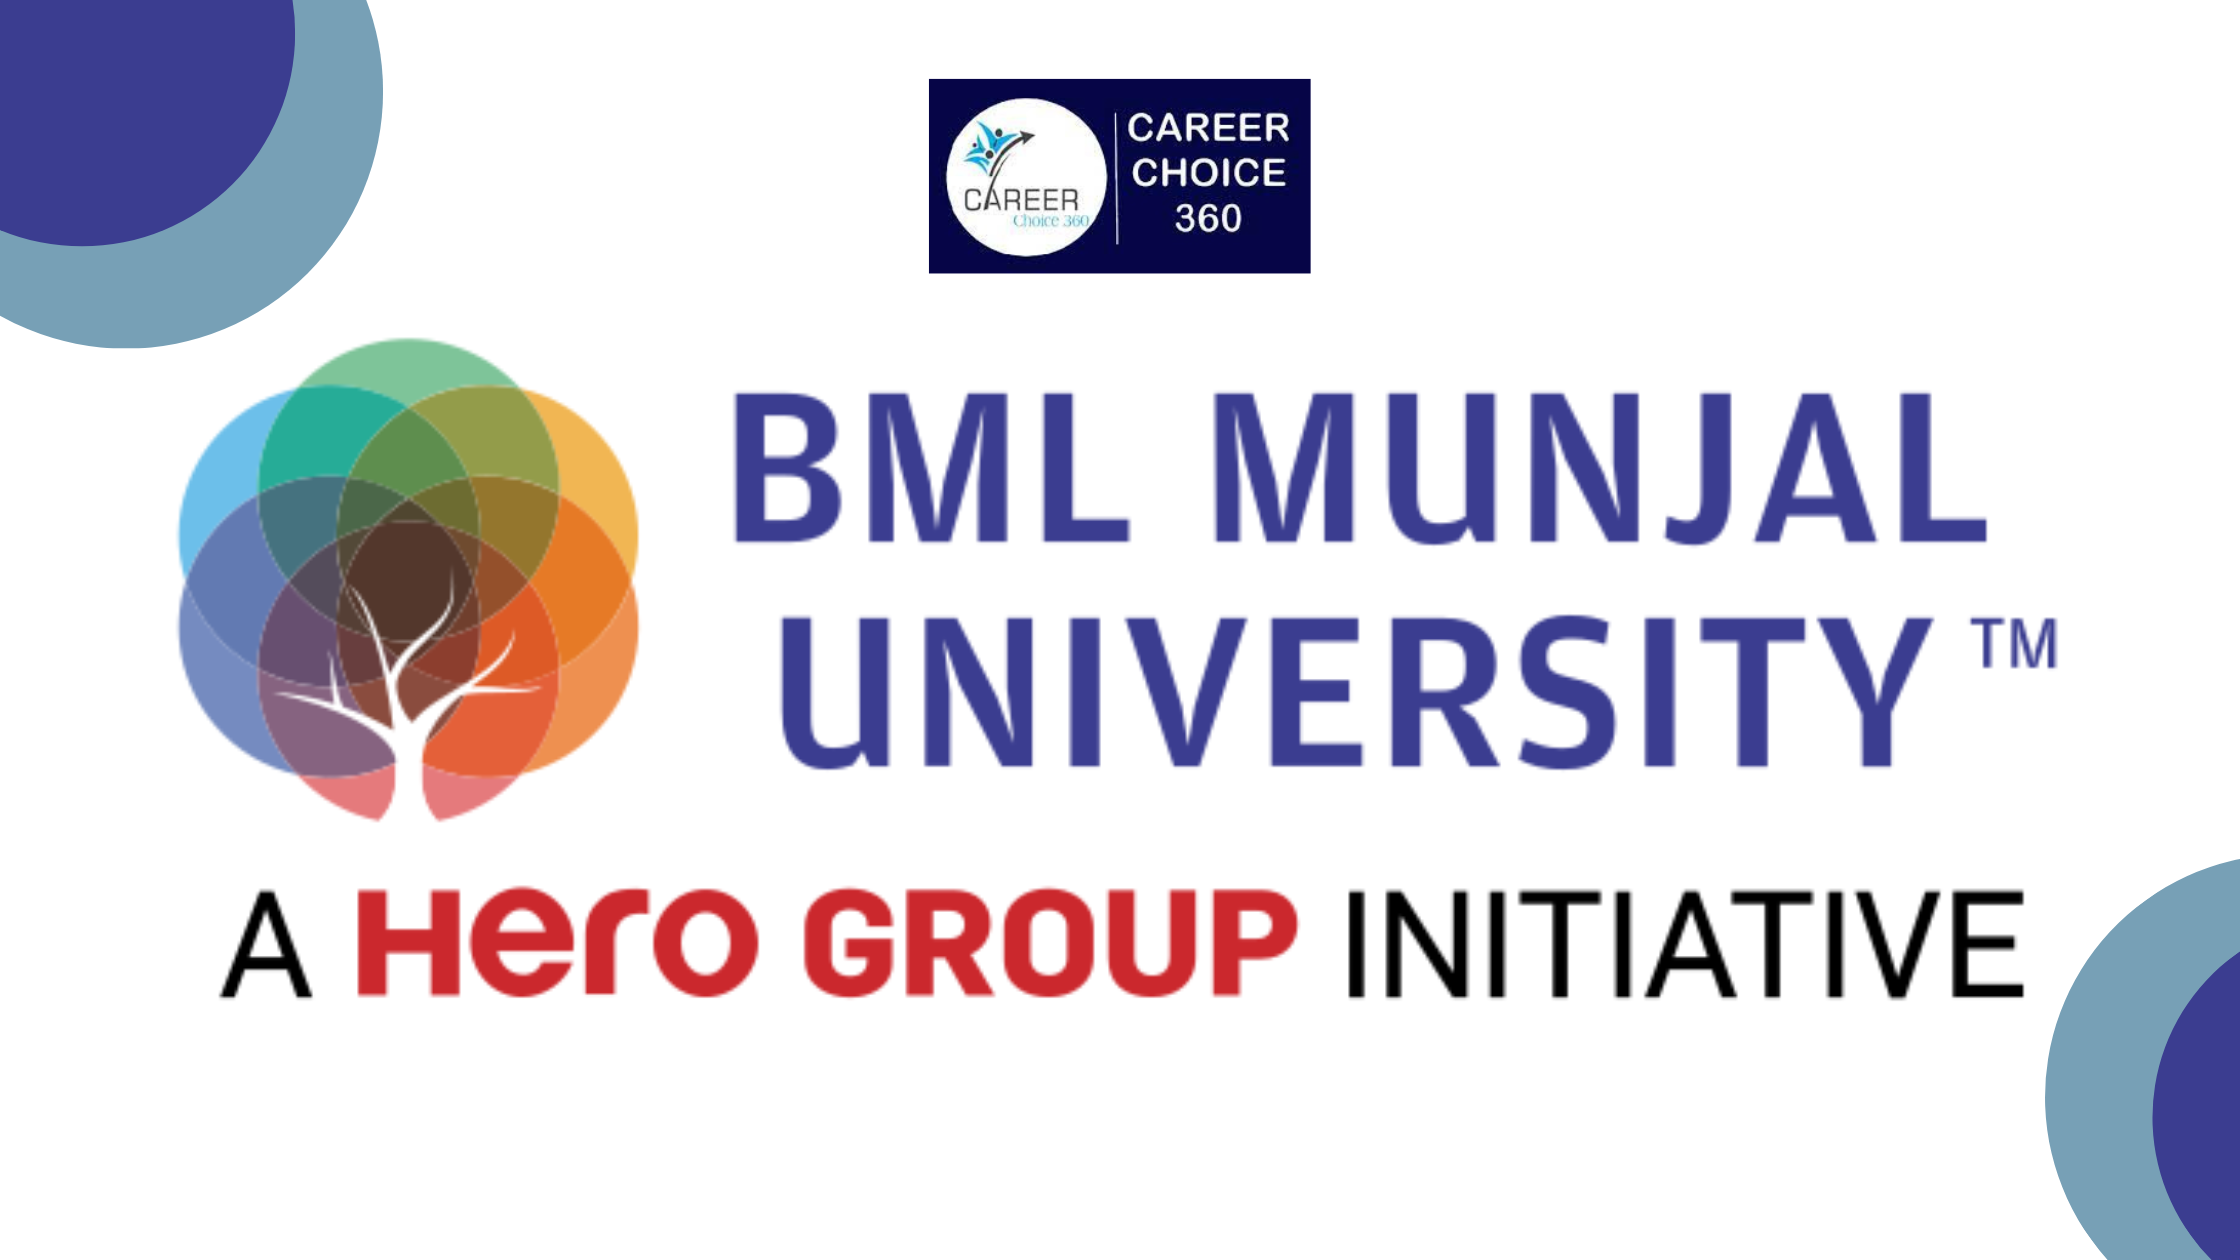 You are currently viewing BML Munjal University Gurgaon: Fees, Courses, Eligibility, Placements And Cutoff